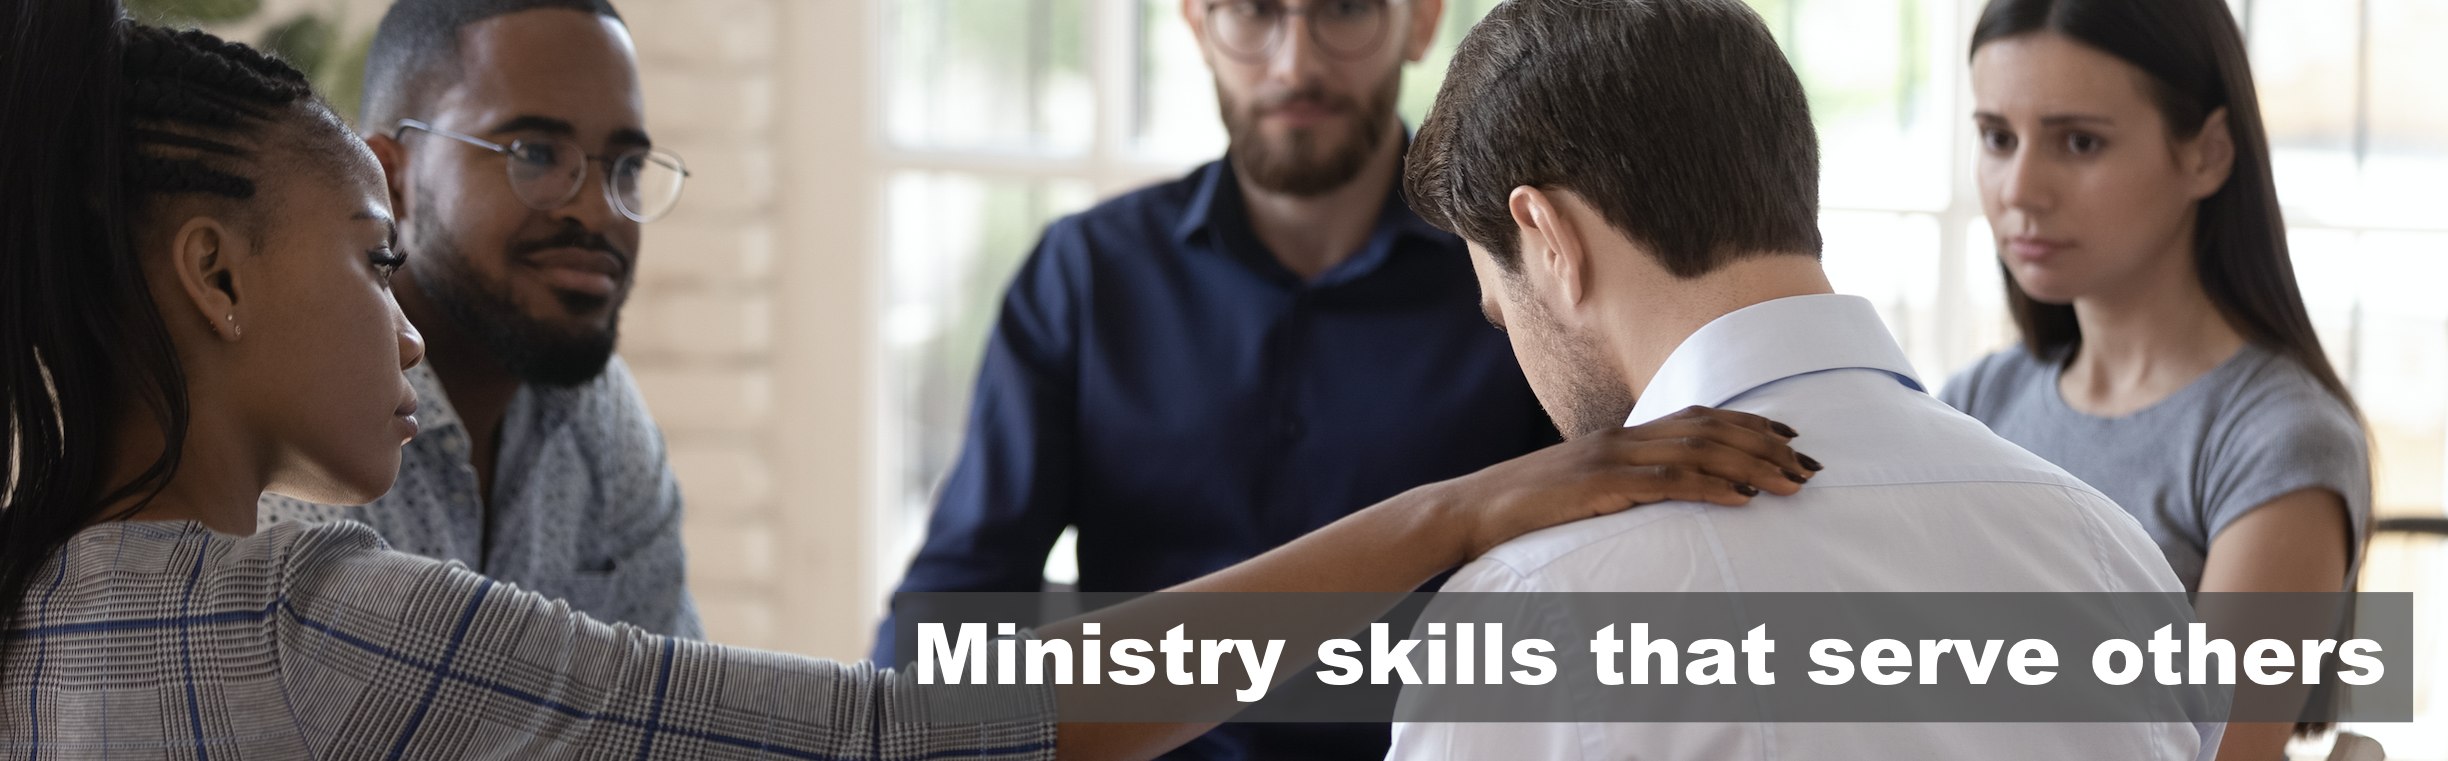 Ministry Skills that serve others